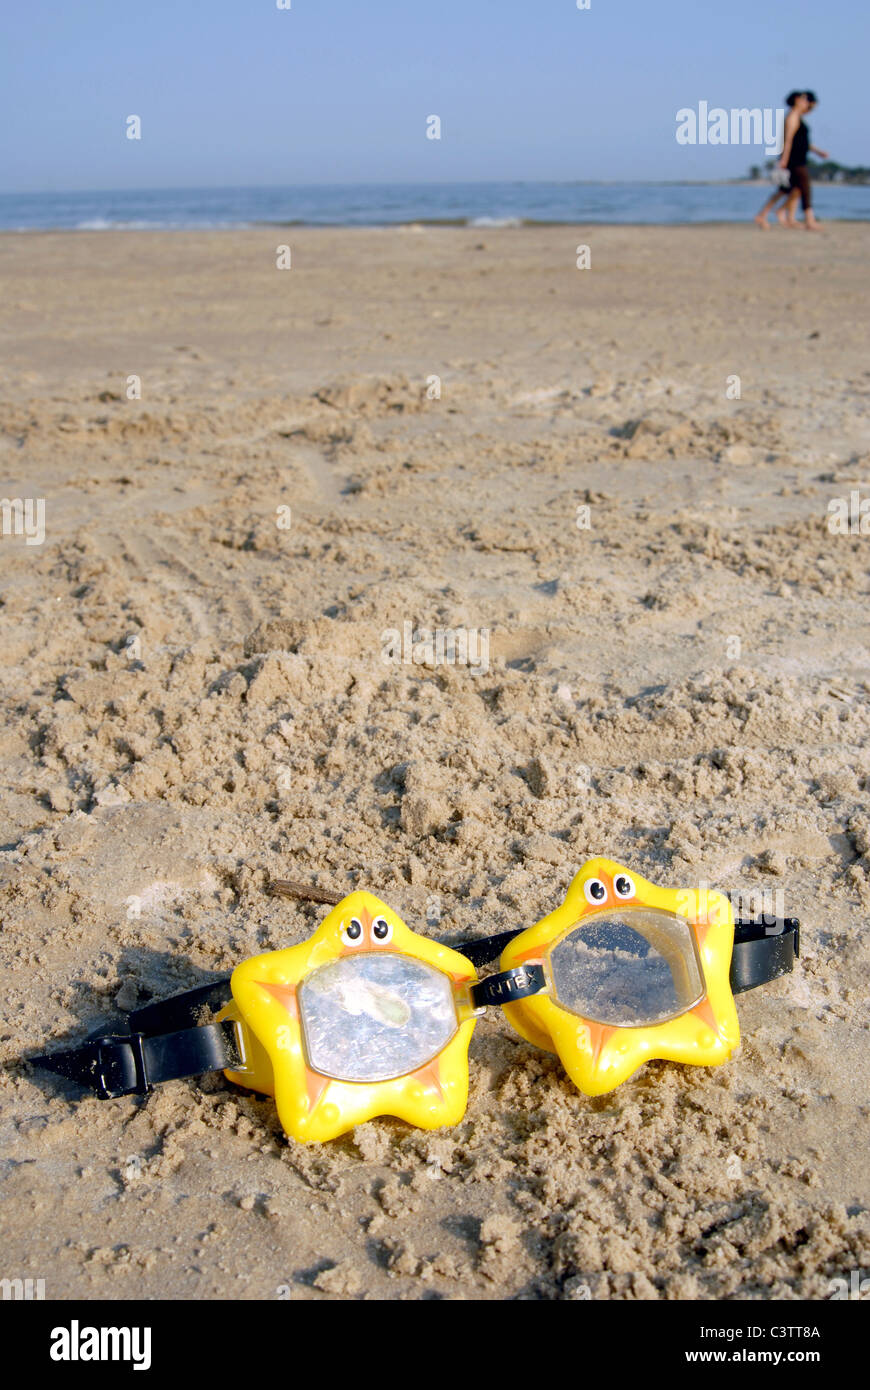 Toy swimming glasses star shaped on the sand. Stock Photo